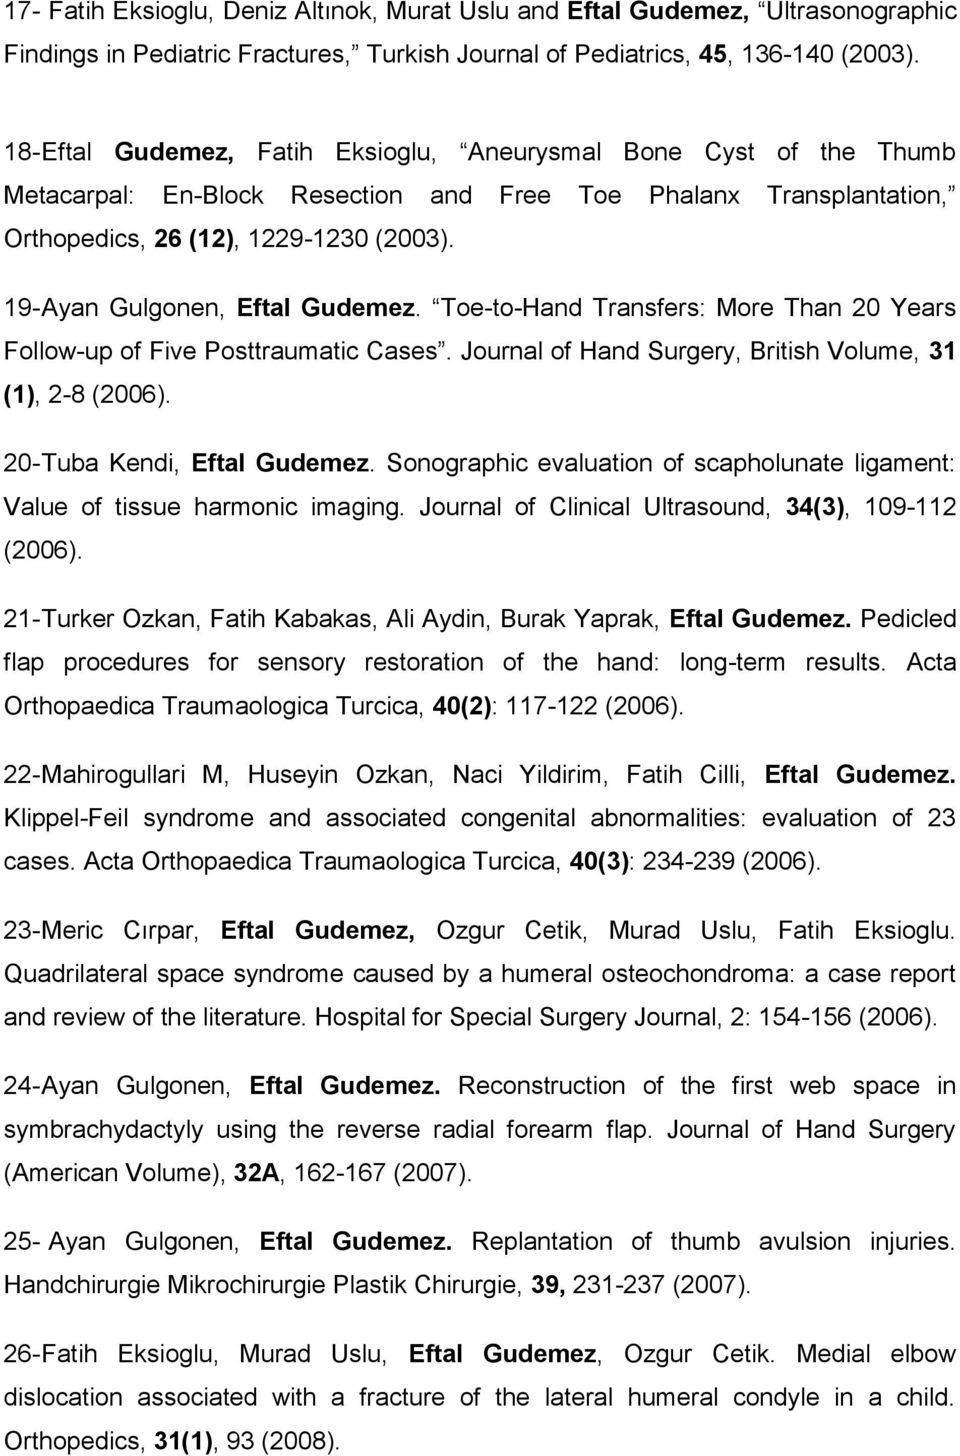 19- Ayan Gulgonen, Eftal Gudemez. Toe-to-Hand Transfers: More Than 20 Years Follow-up of Five Posttraumatic Cases. Journal of Hand Surgery, British Volume, 31 (1), 2-8 (2006).